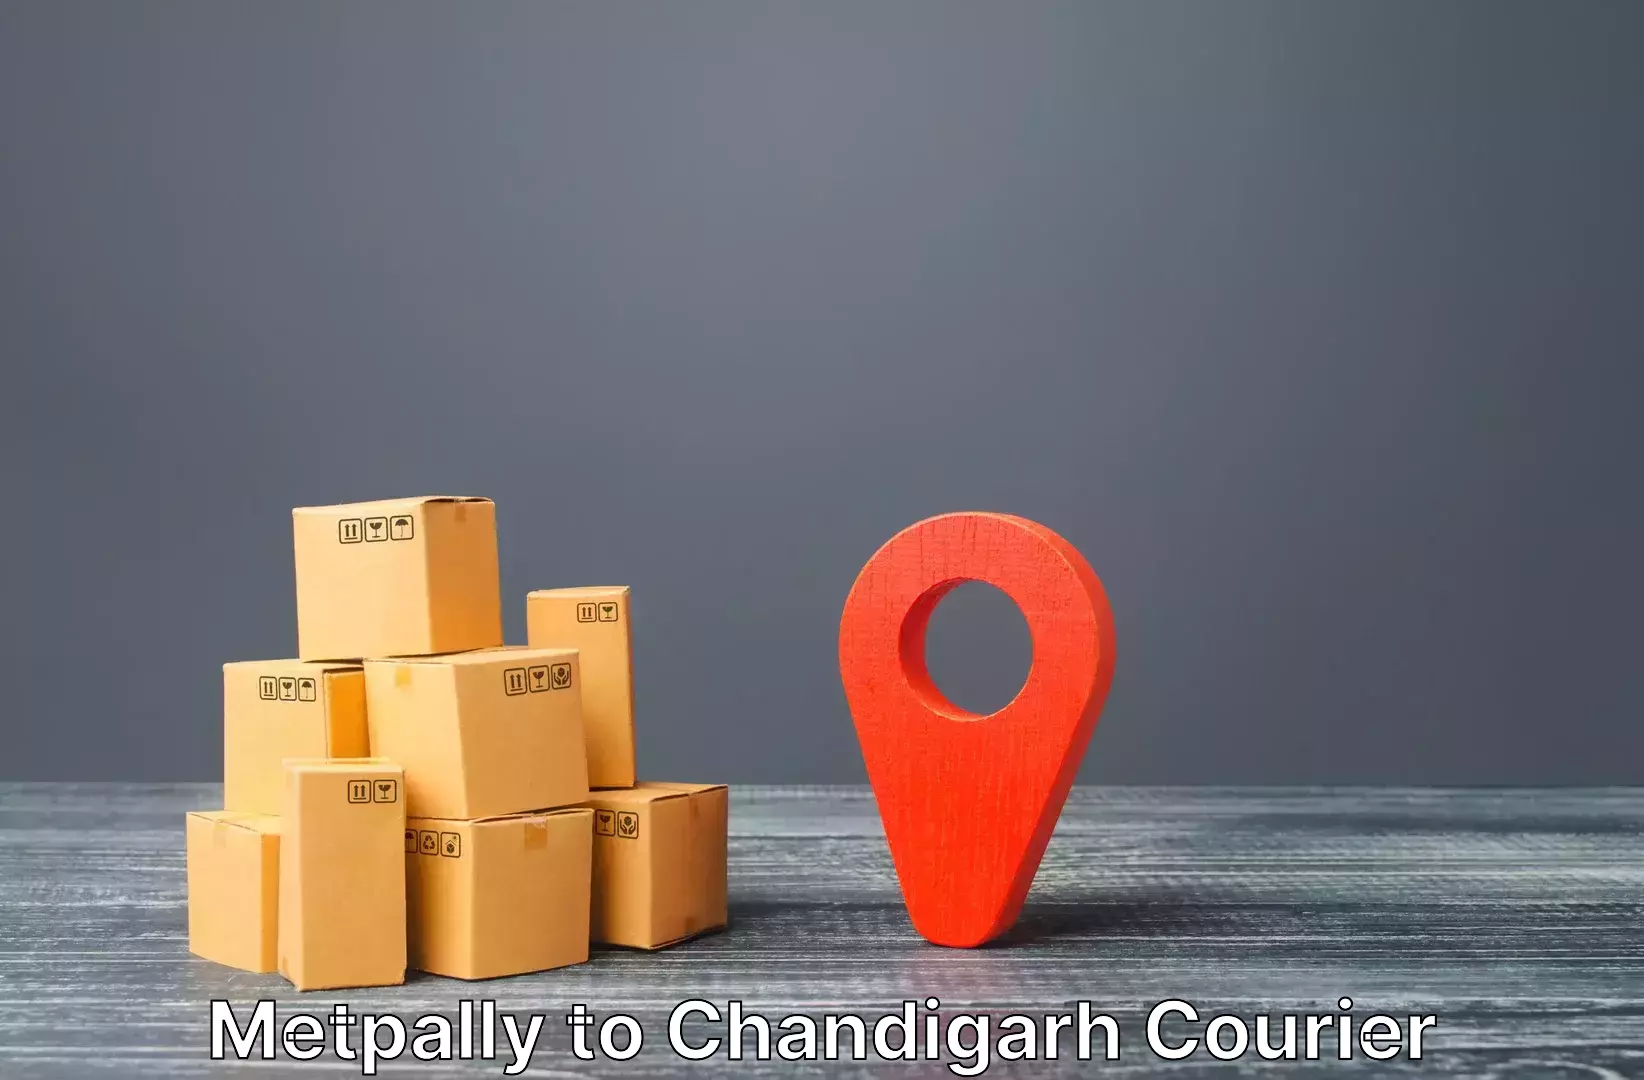 Baggage transport professionals Metpally to Chandigarh